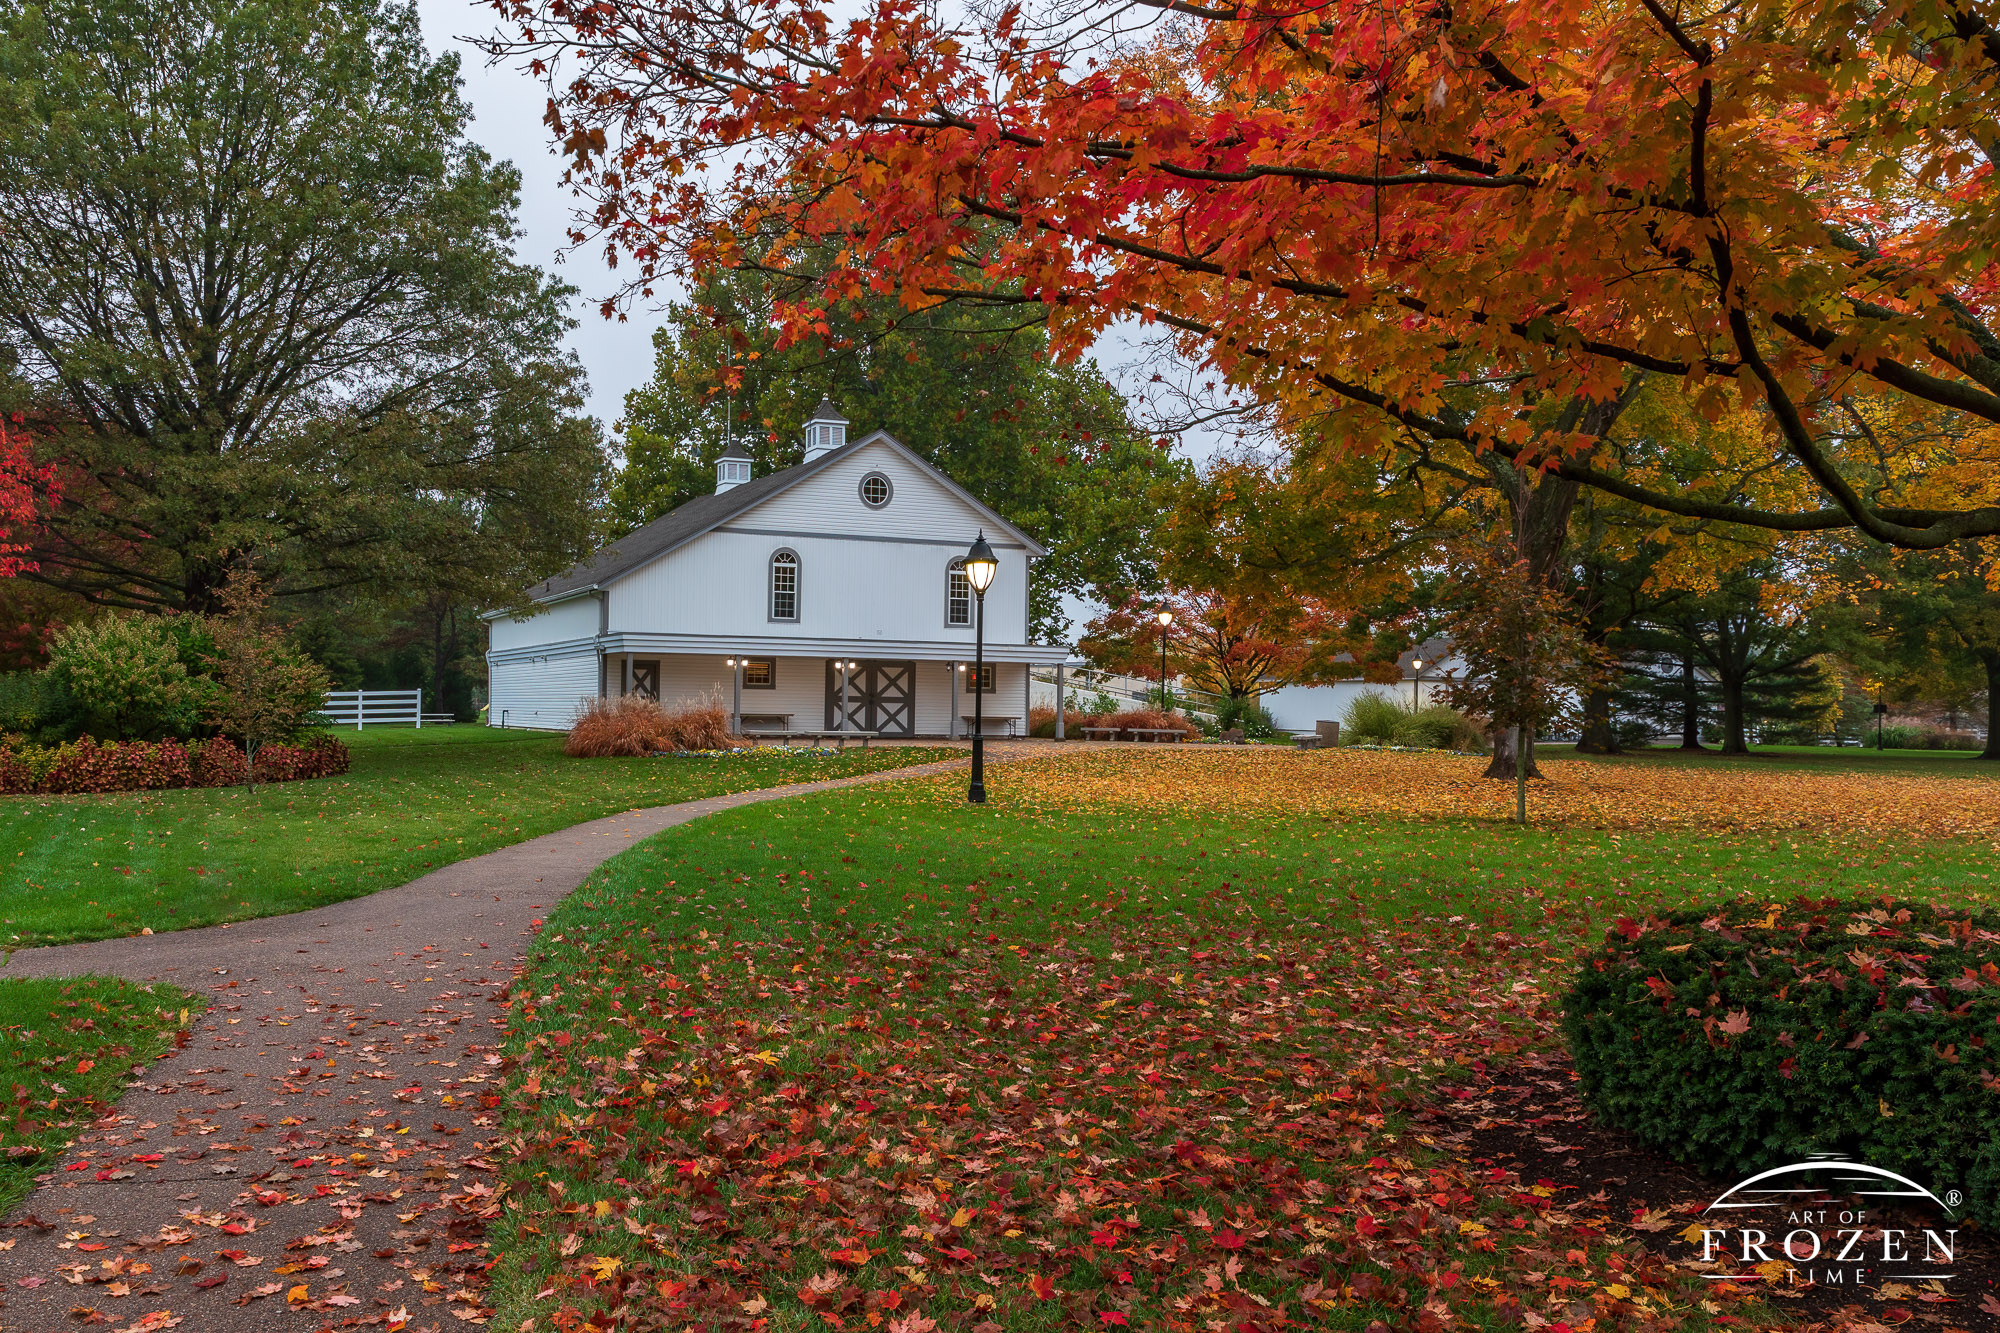 A walking path leading the view under colorful maple trees towards a barn on a raining autumn evening